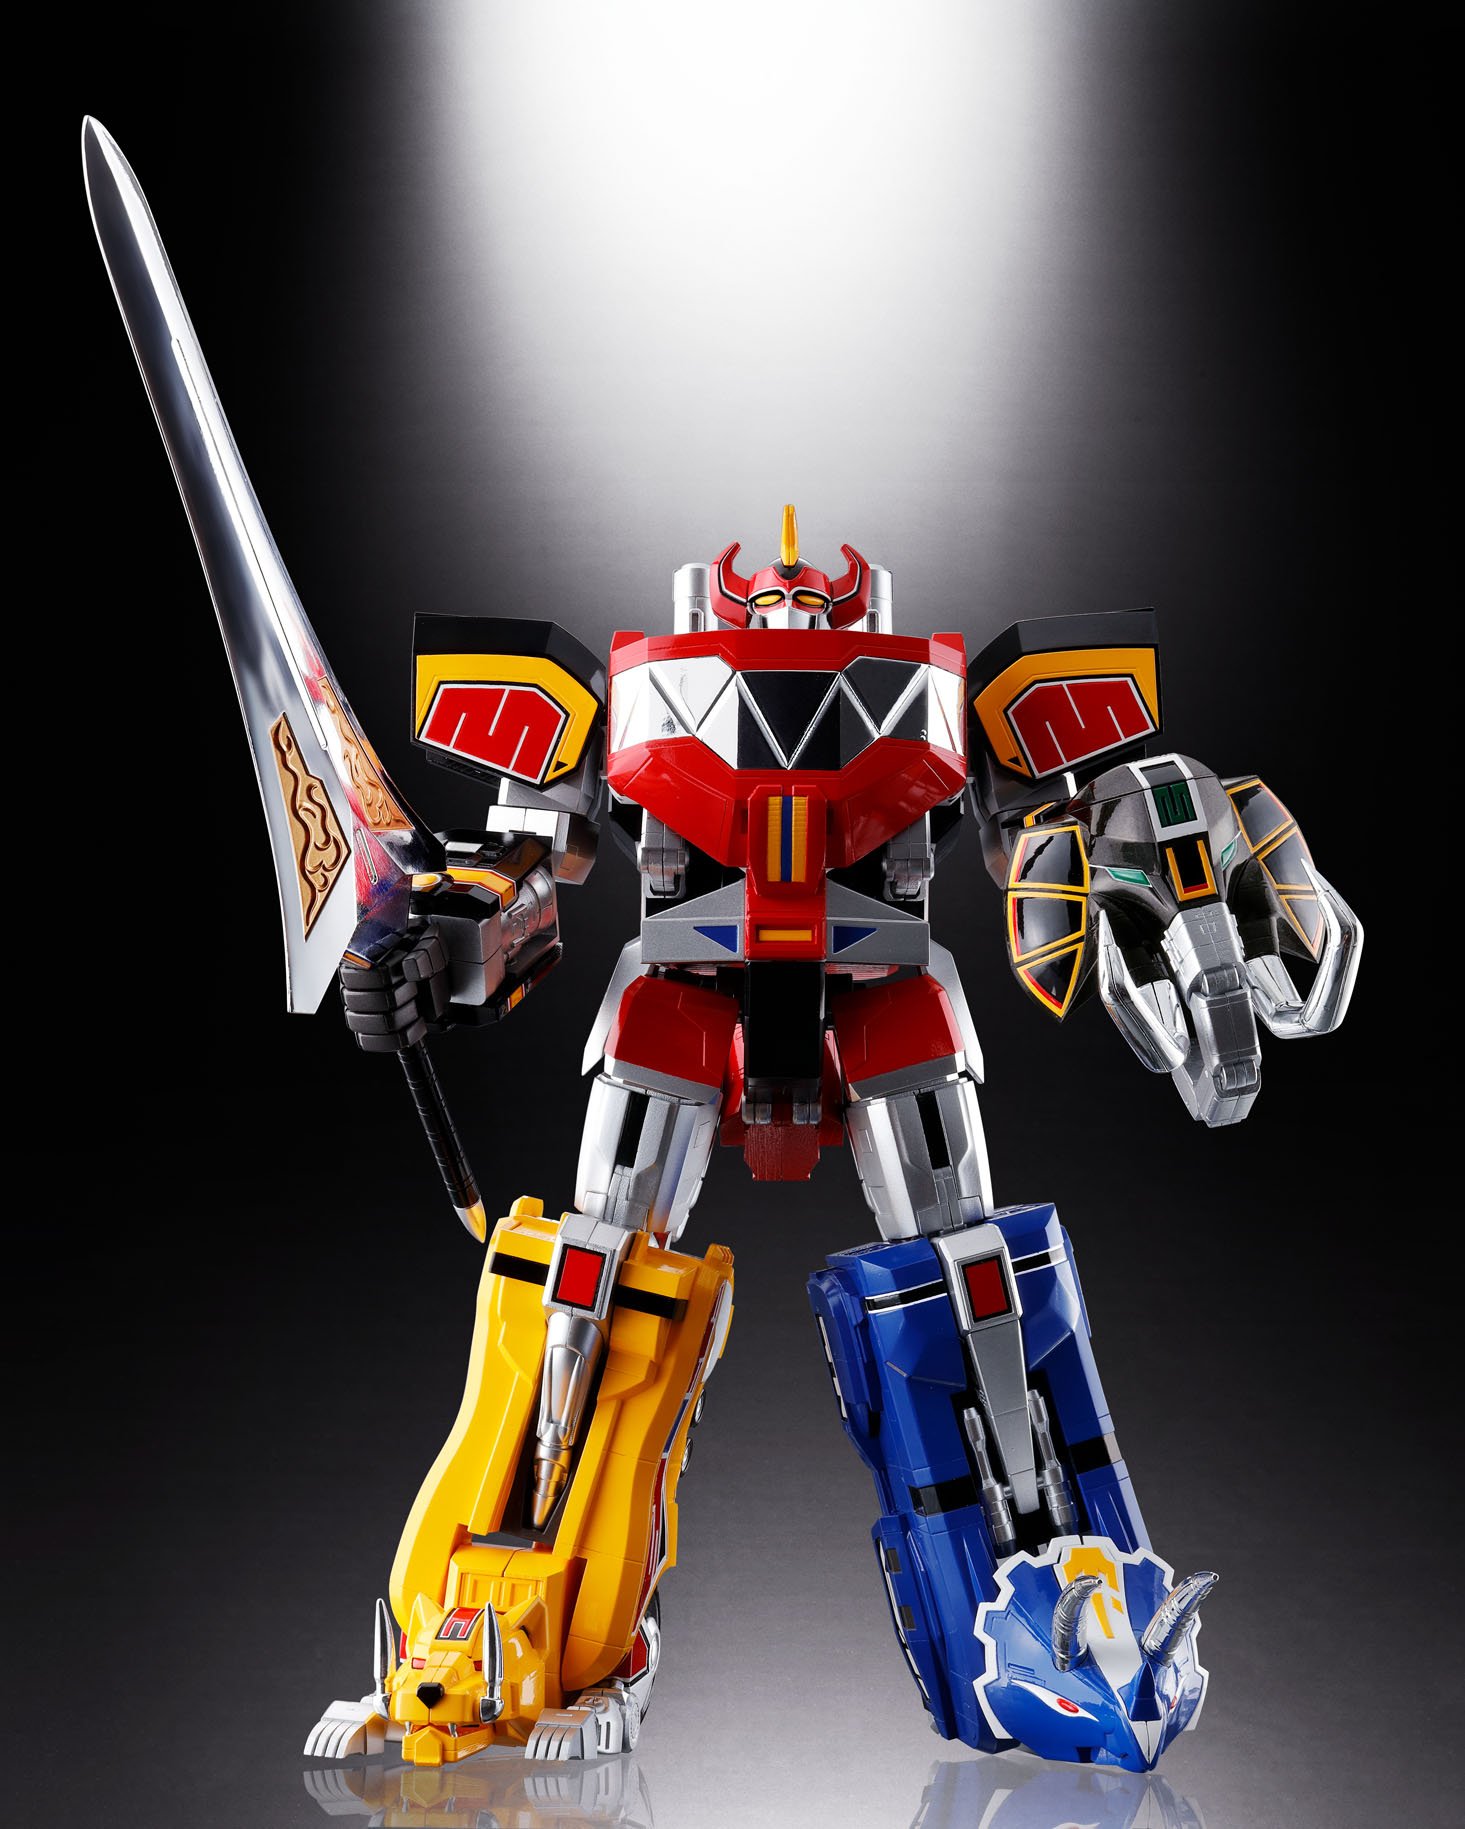 Bandai Tamashii Nations Soul of Chogokin Mighty Morphing Power Rangers Action Figure, for 150 months to 720 months